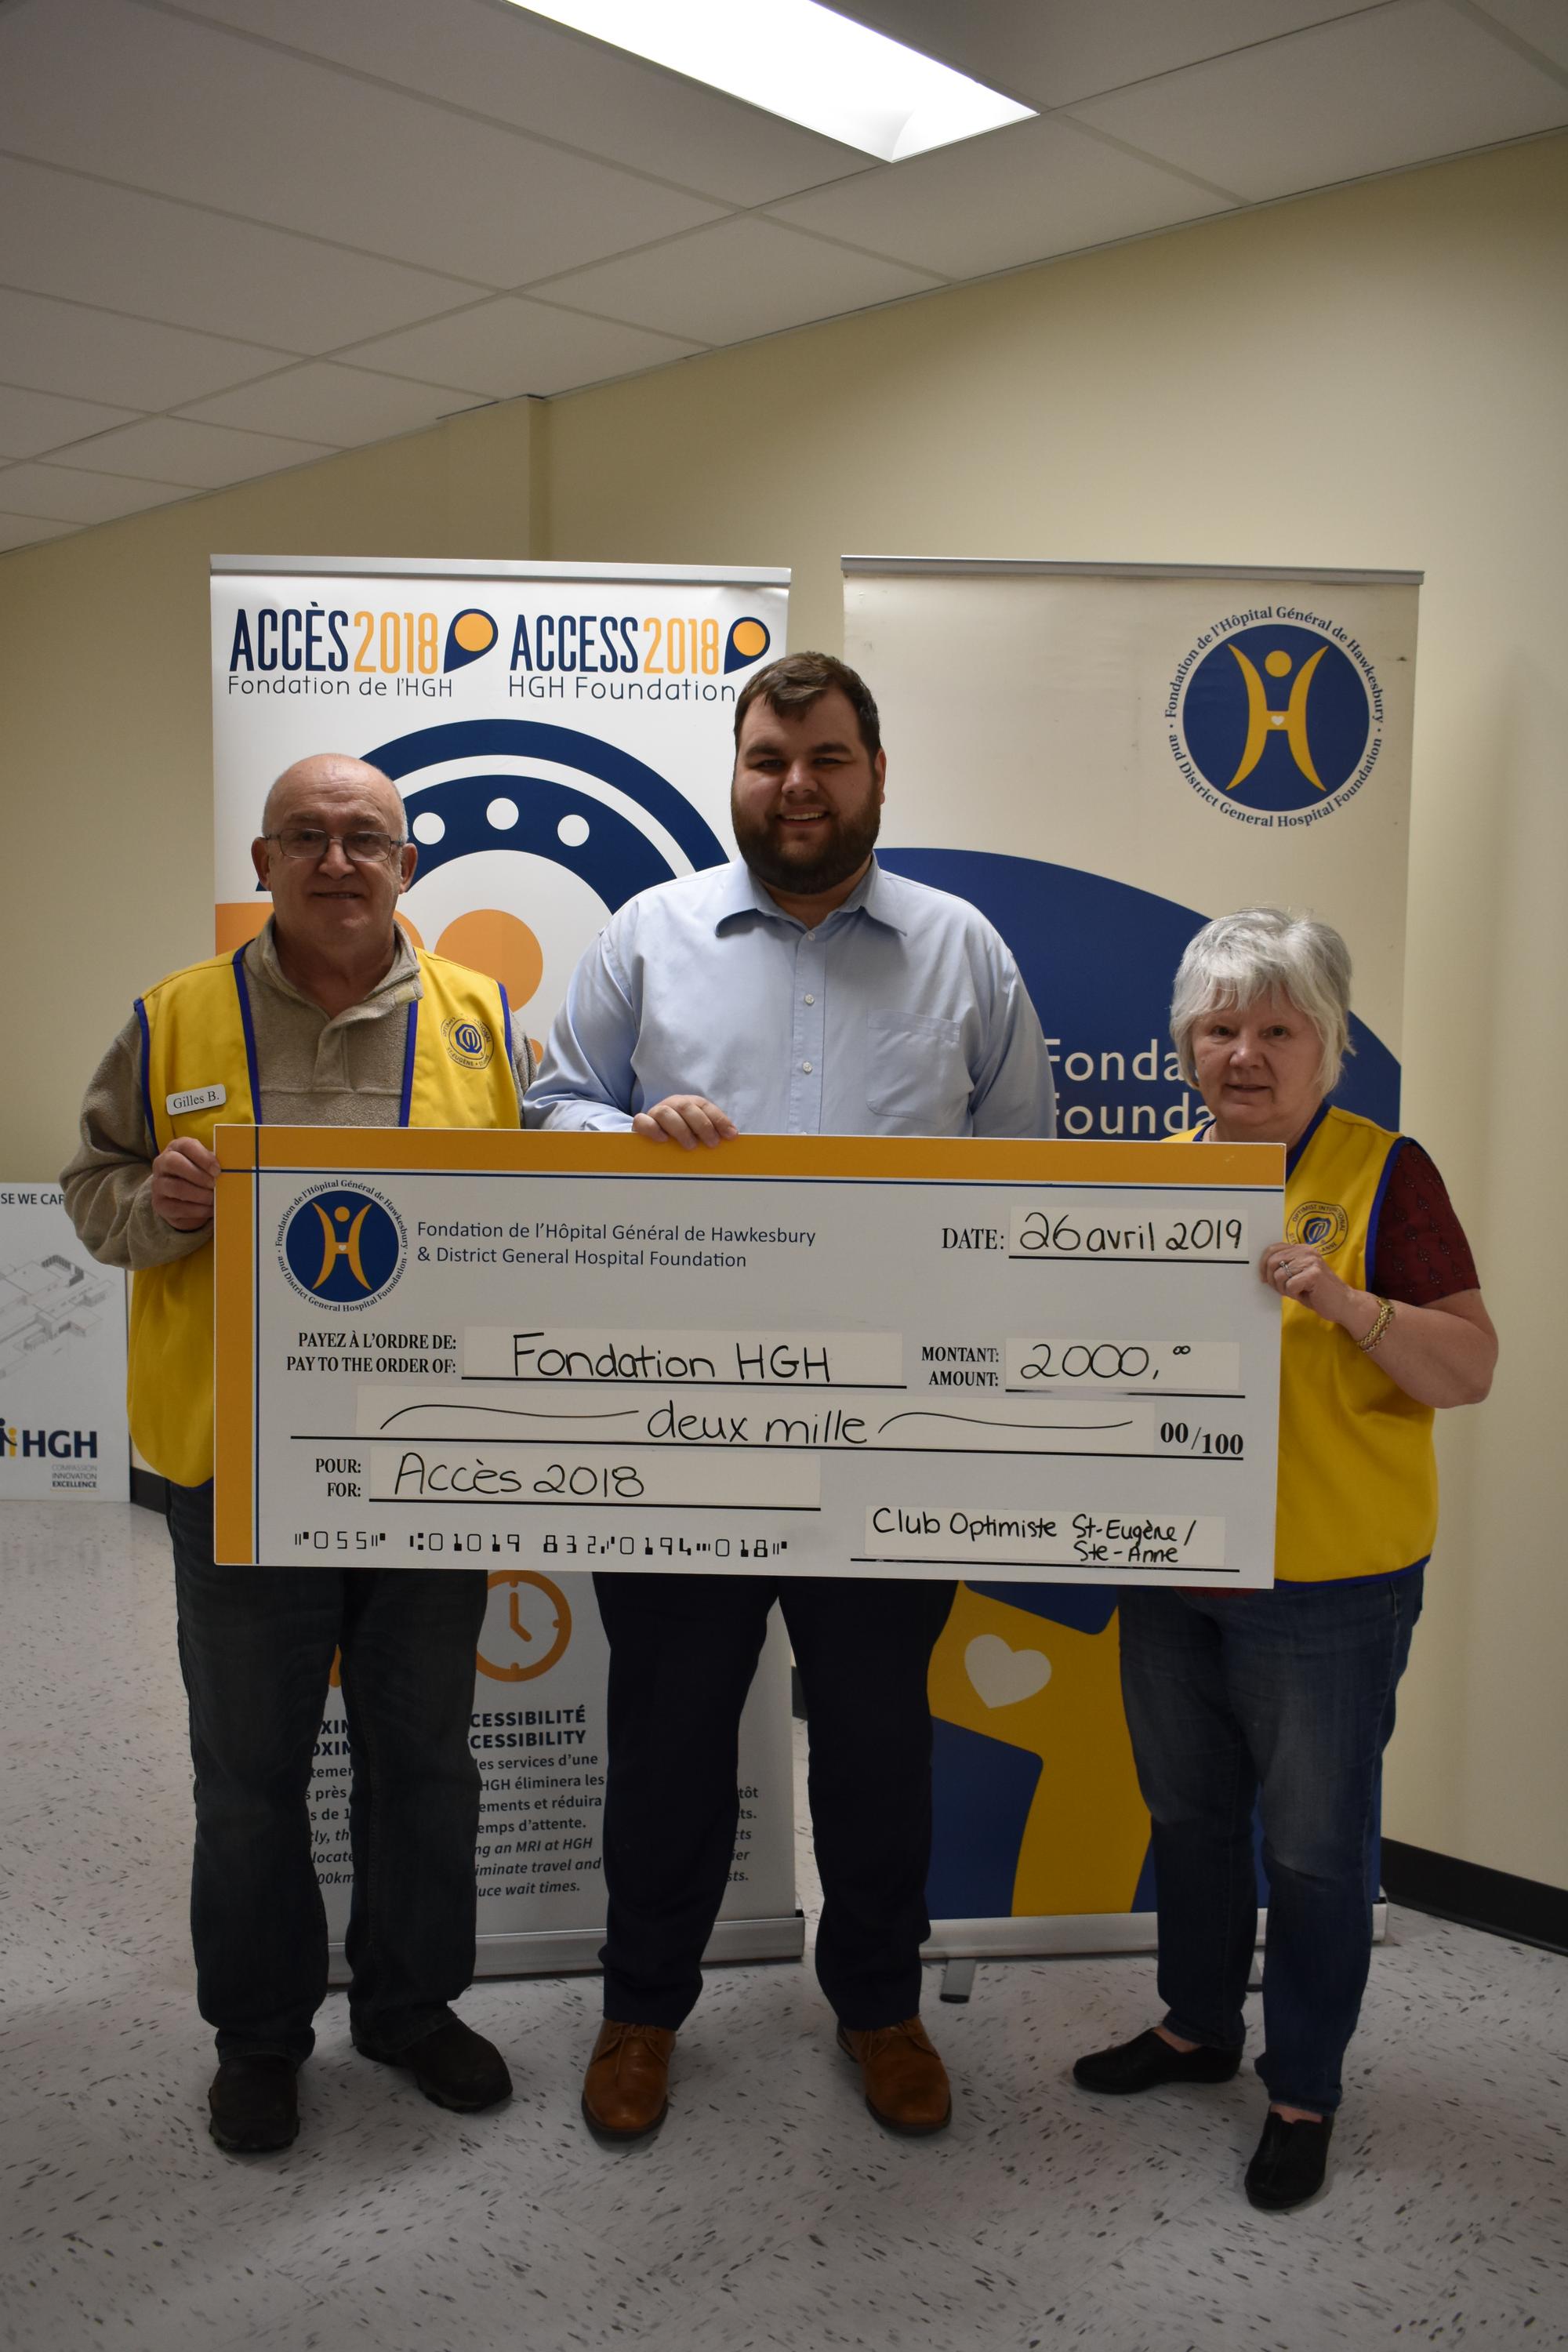 The Optimist Club of St-Eugène and Ste-Anne donates $2,000 to the HGH Foundation